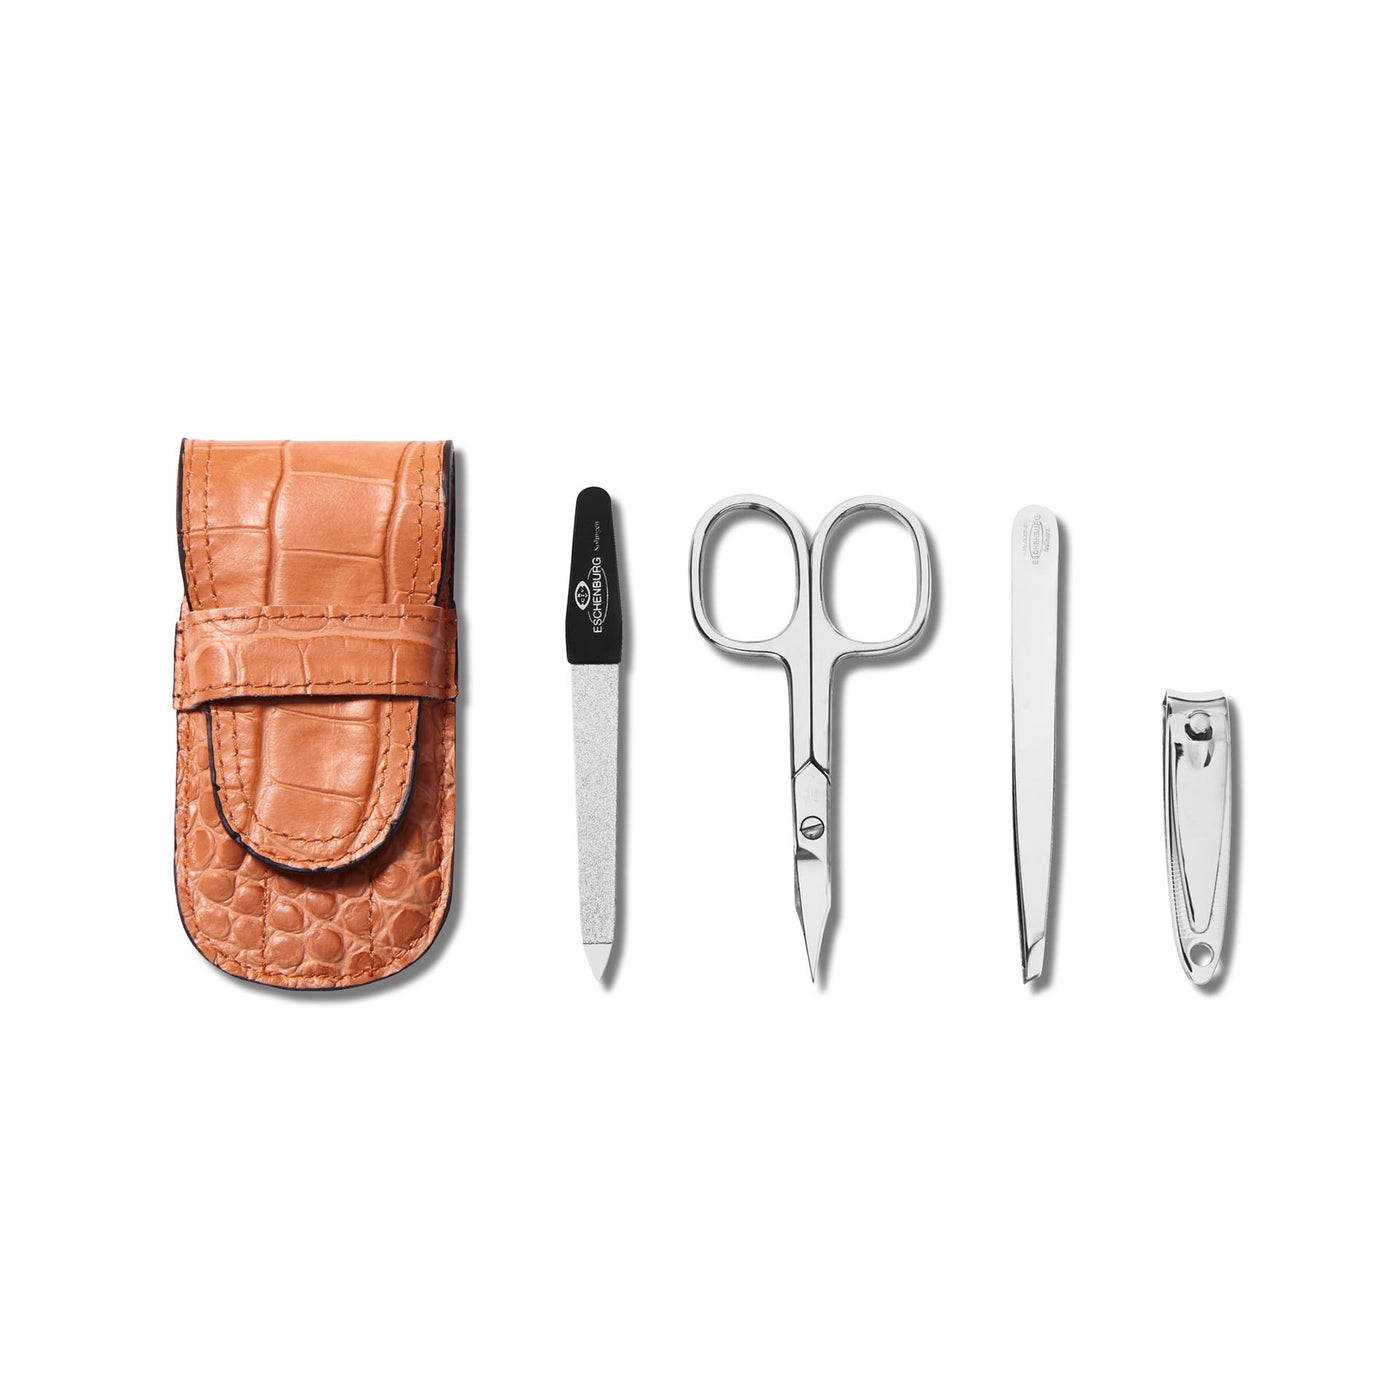 Nickleplated Personal Grooming Set with Leather Travel Holder - Orange